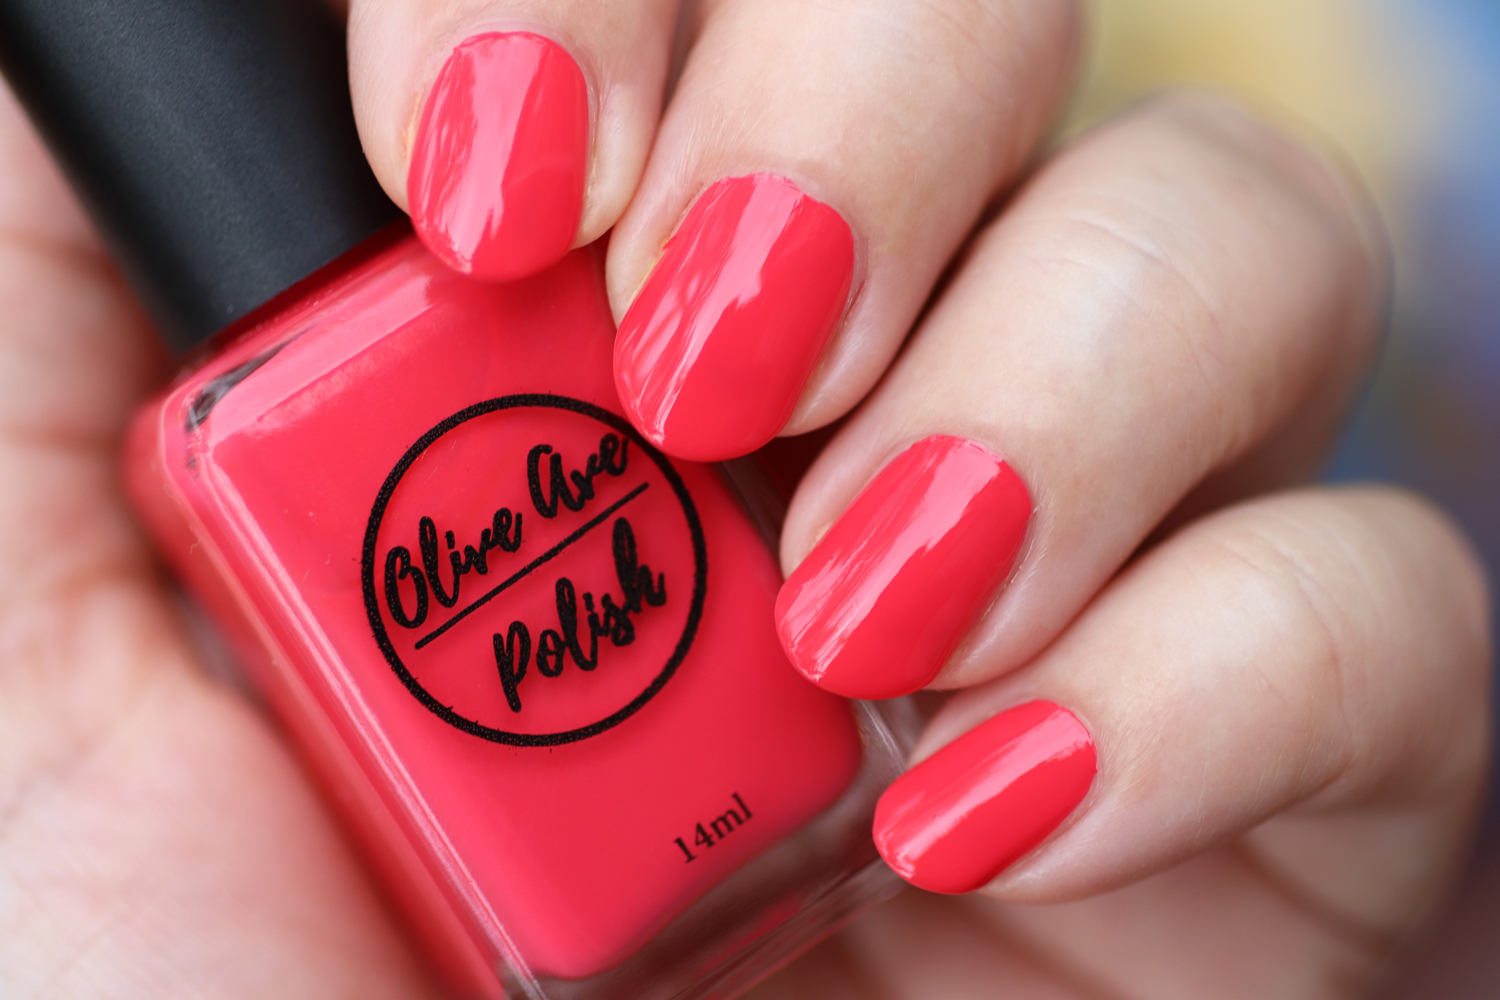 Strawberry coral pink nail polish by Olive Ave